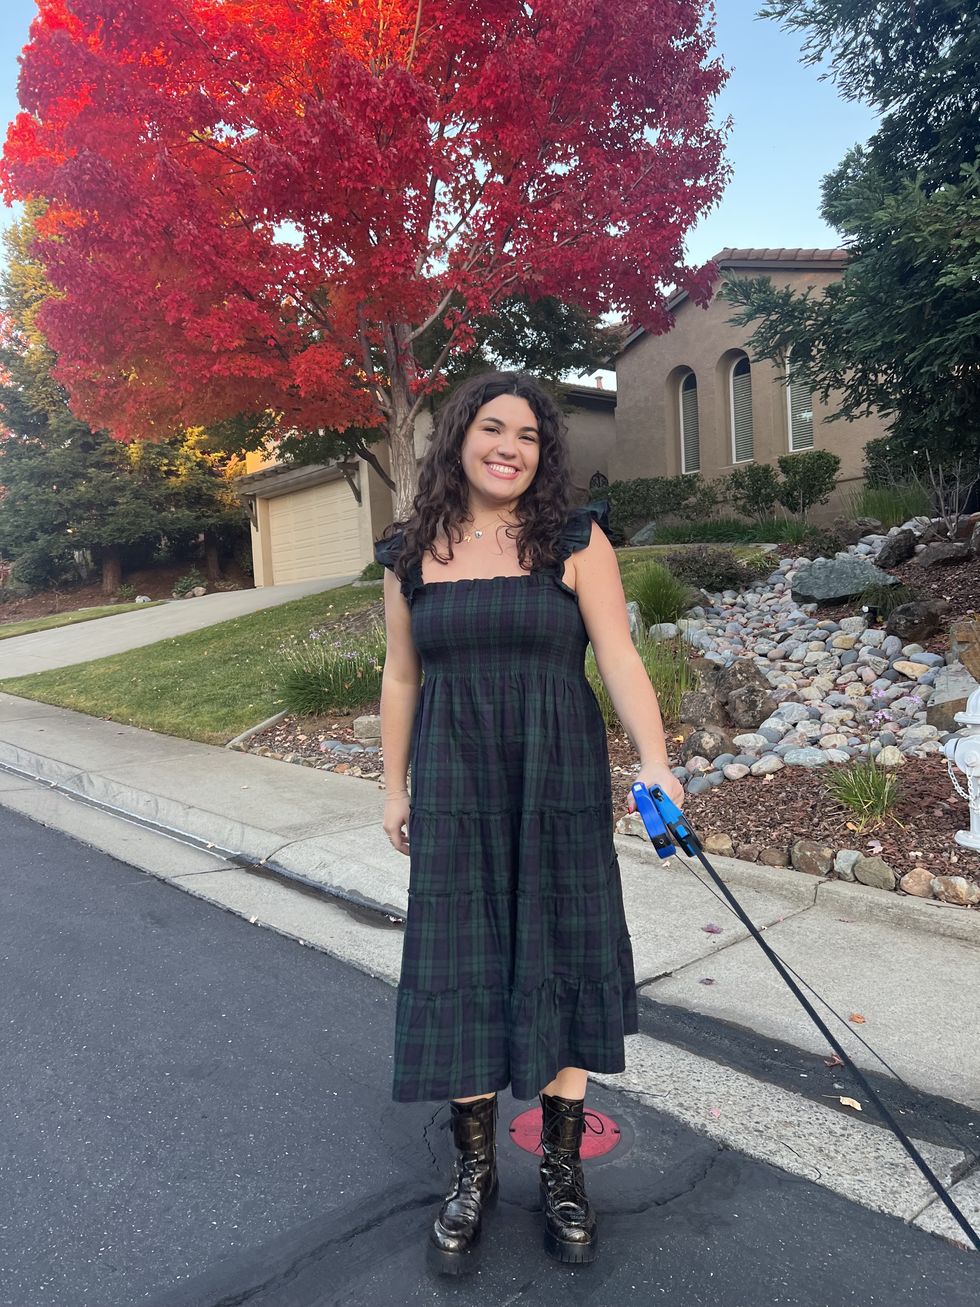 bianca wearing the ellie nap dress outside on the street while holding two dog leashes